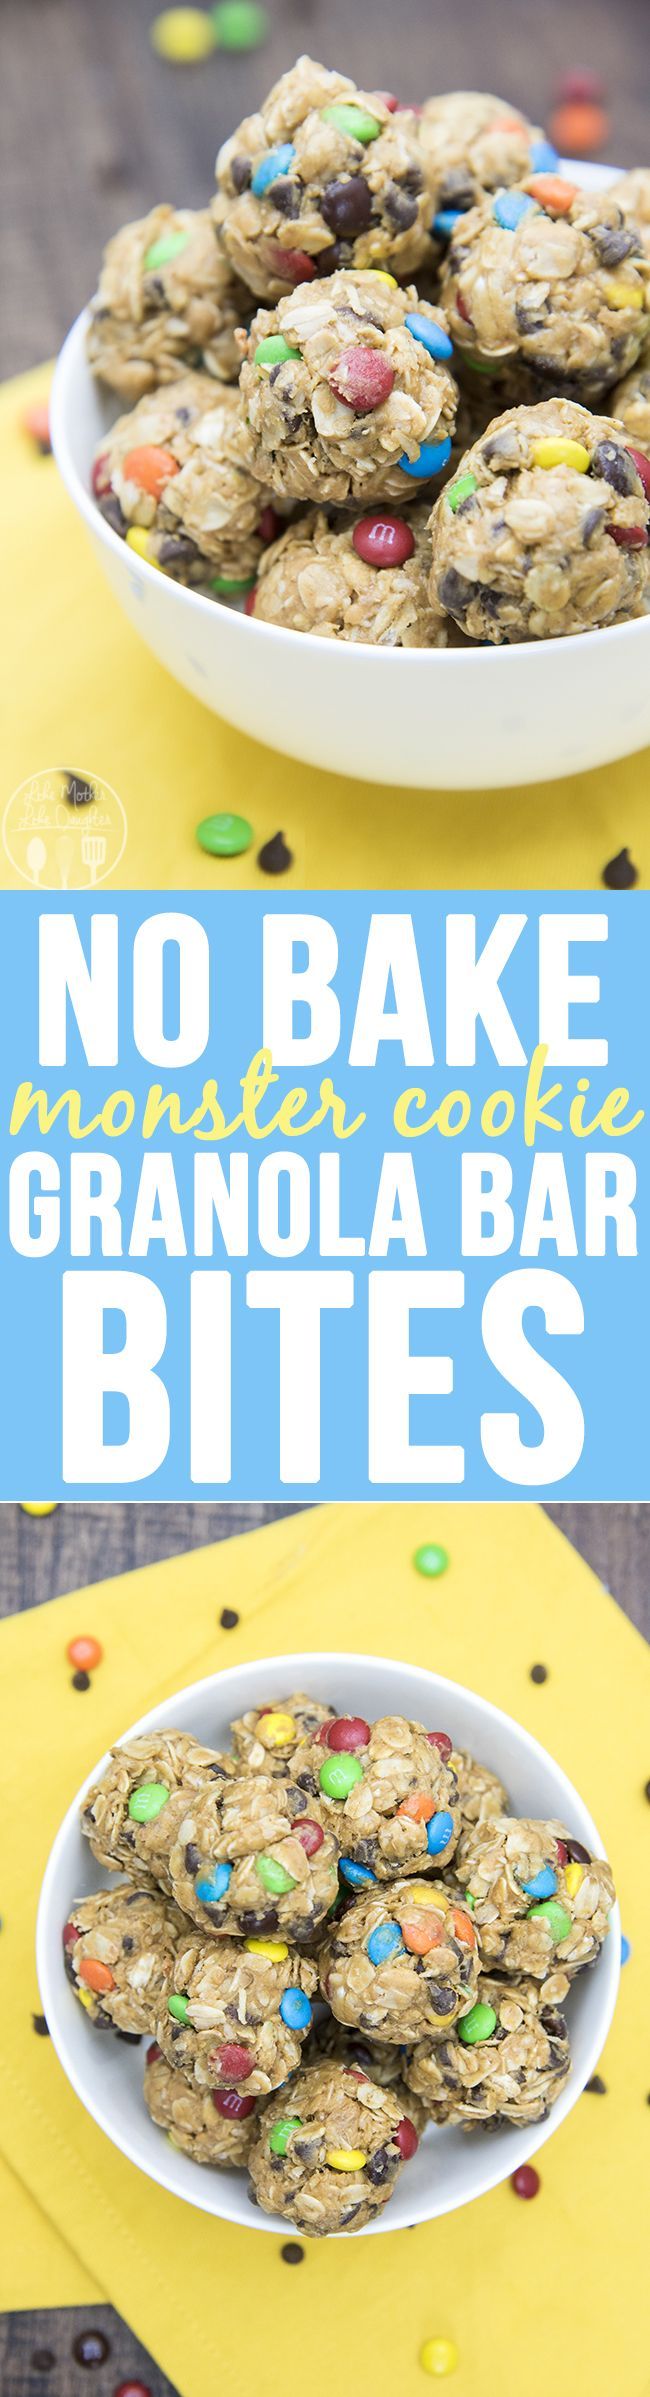 No Bake Monster Cookie Granola Bar Bites – these no bake granola bar bites taste just like monster cookies, without the flour and